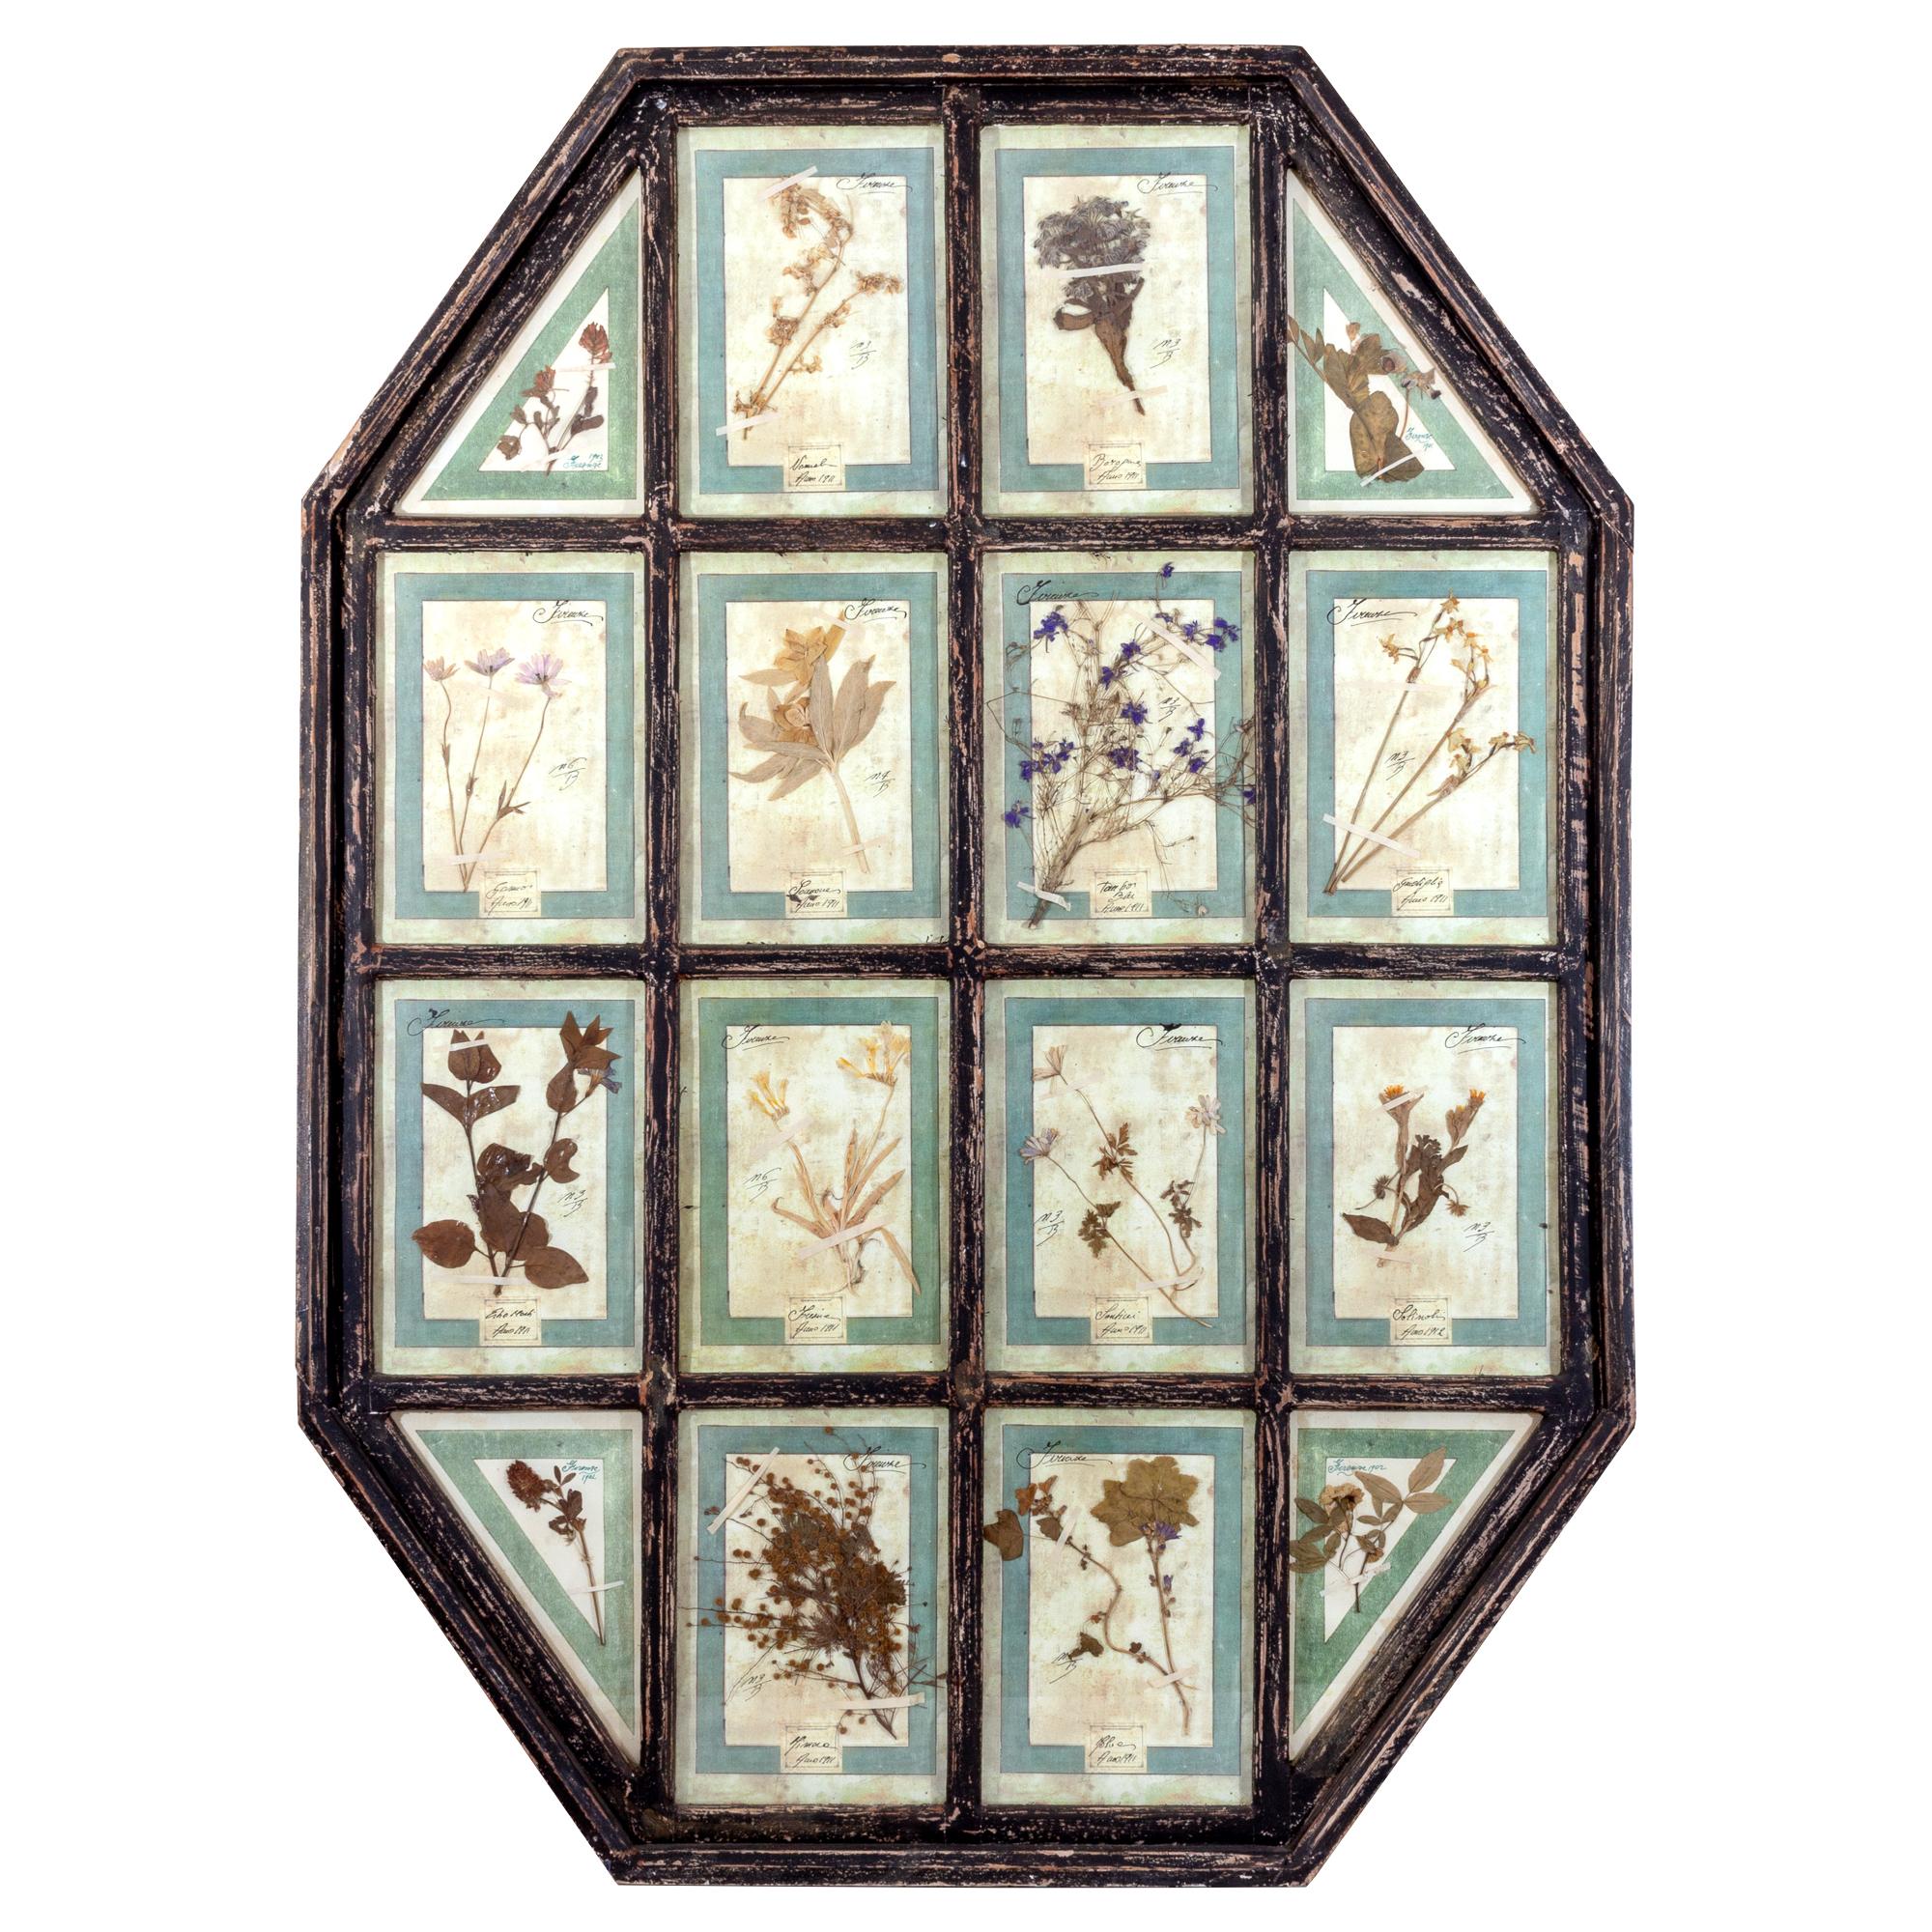 This stunning pairing of framed dried botanicals was uncovered on a trip to Italy. The octagonal shape of each piece is particularly unique, and a closer look reveals the love and care that went into the preparation and display of each specimen. The